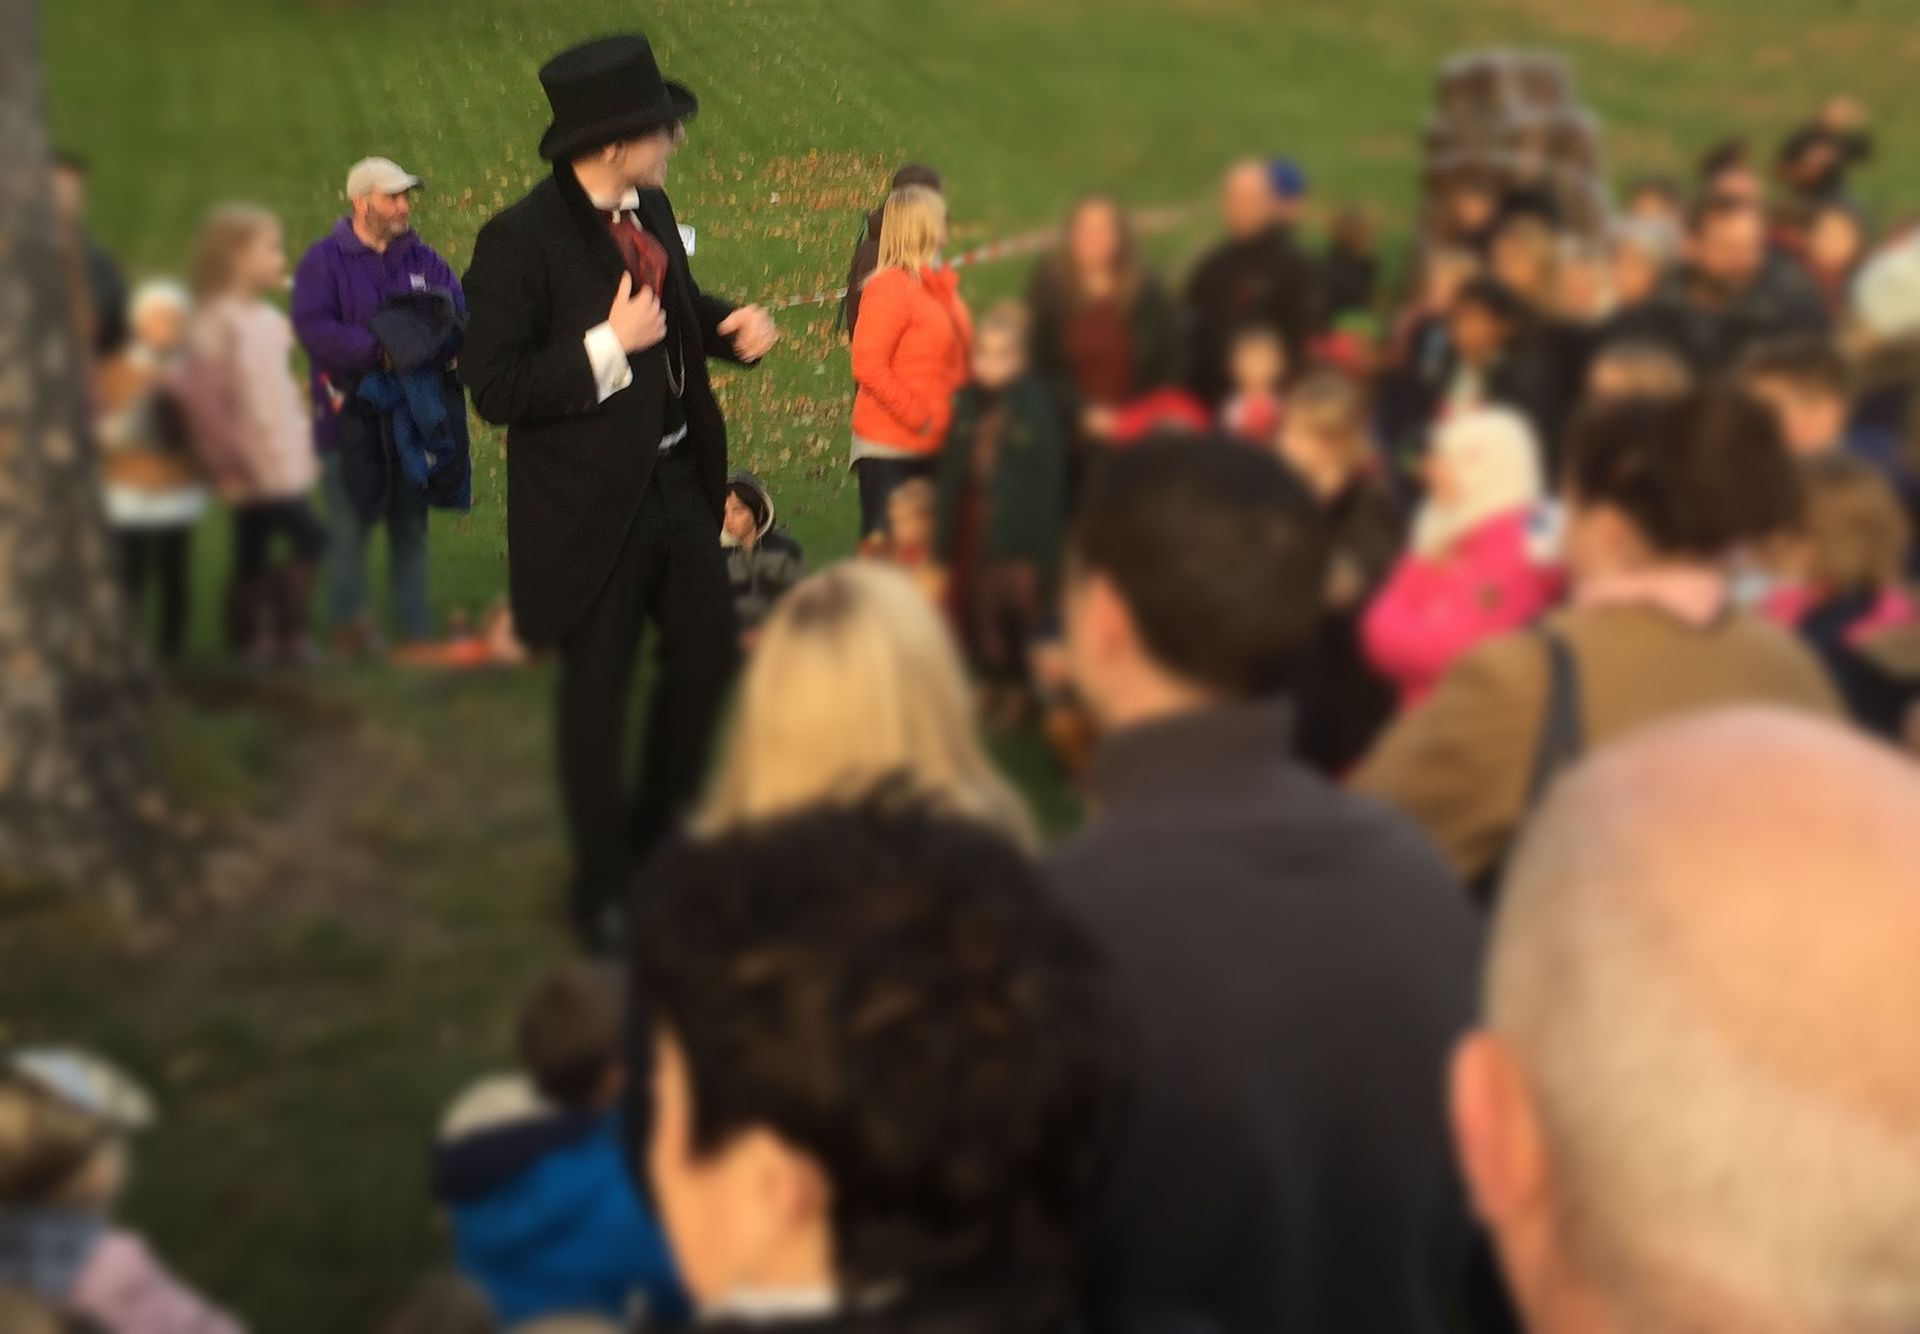 Storyteller Ben Glover telling a spooky story to a crowd of people at a halloween event.